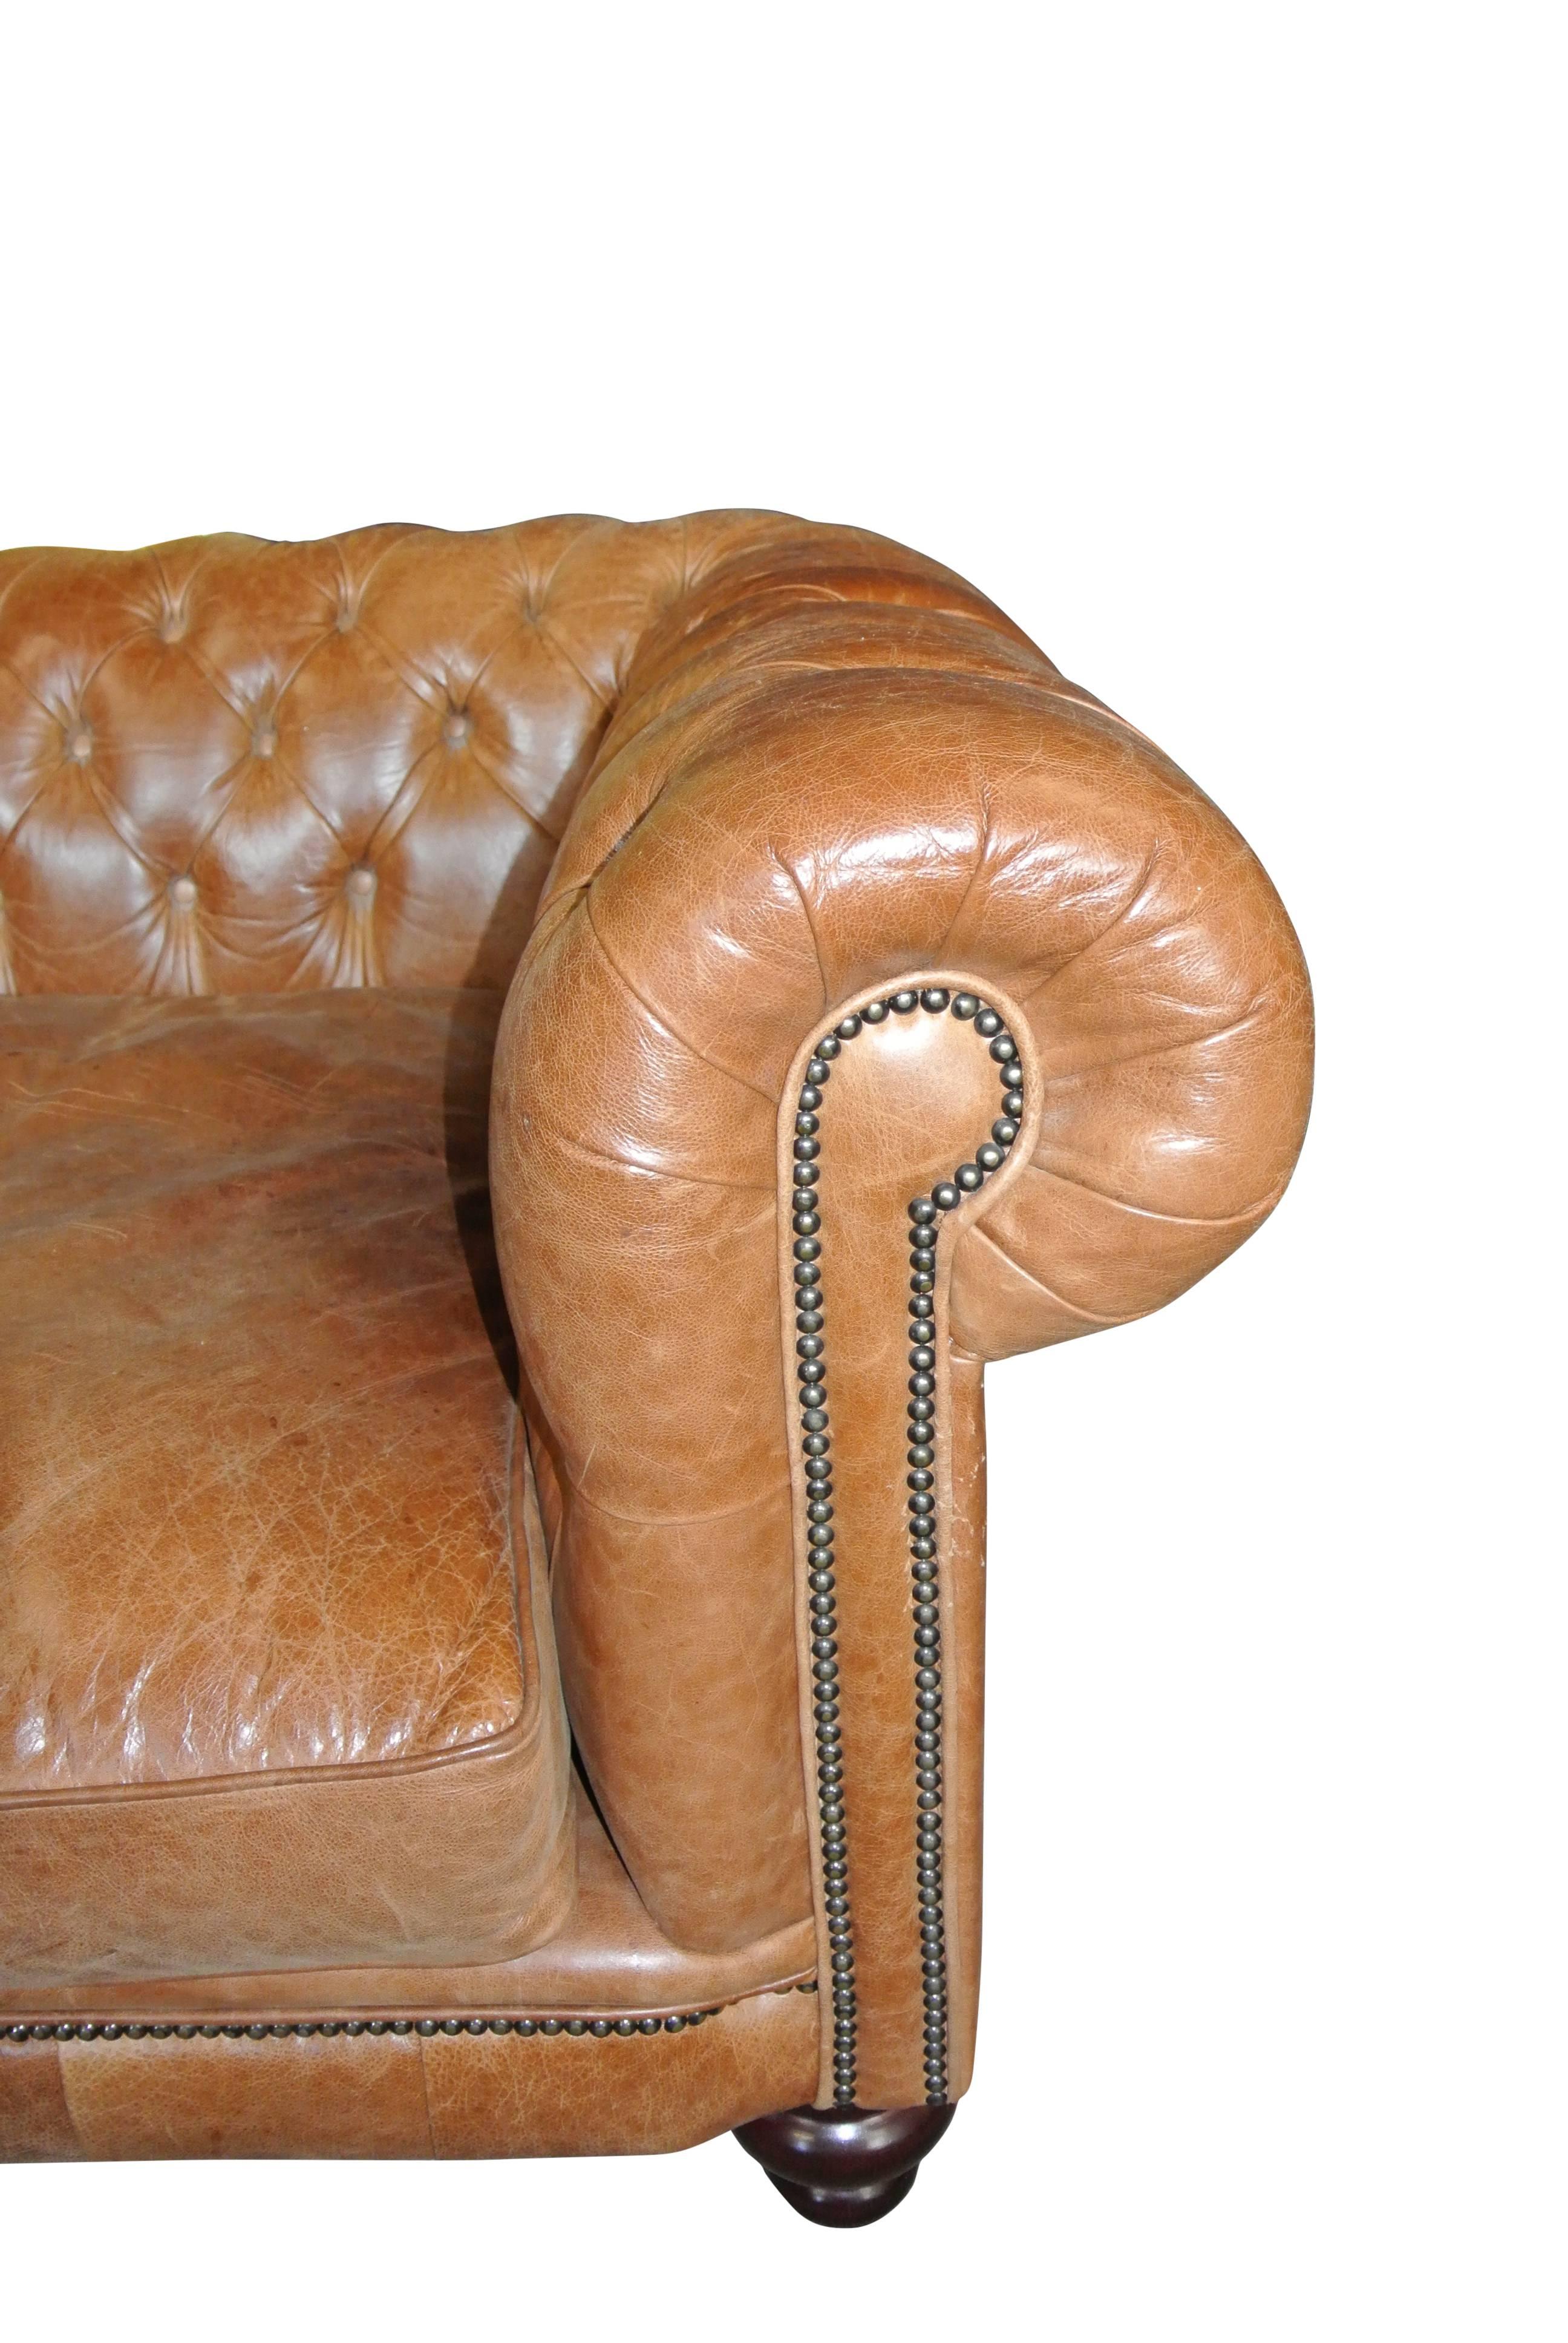 Great Britain (UK) Very Large Leather Chesterfield Settee